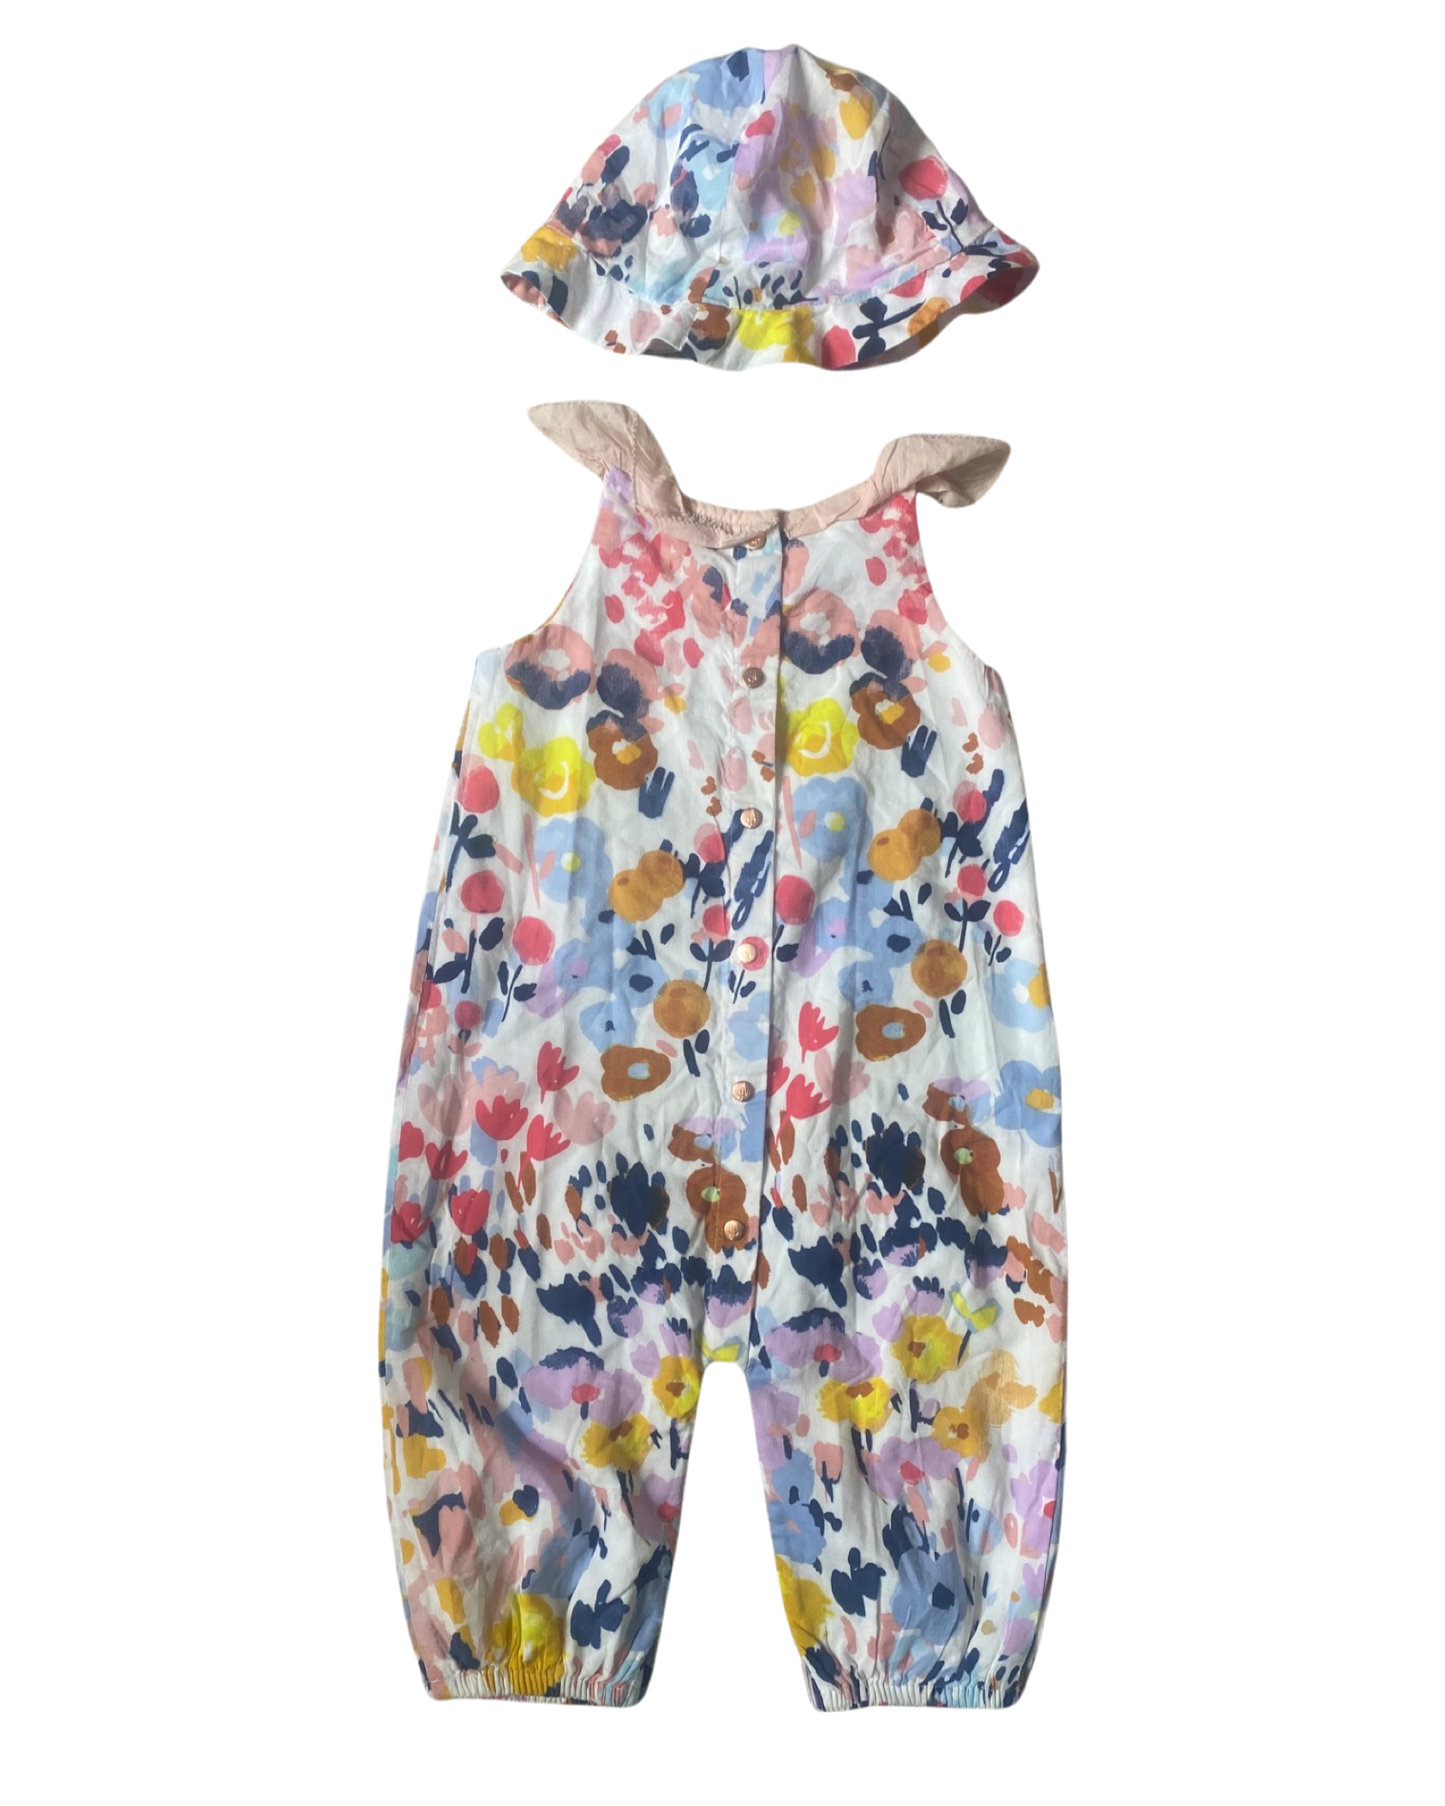 M&S floral print romper with matching sun hat (size 9-12mths)